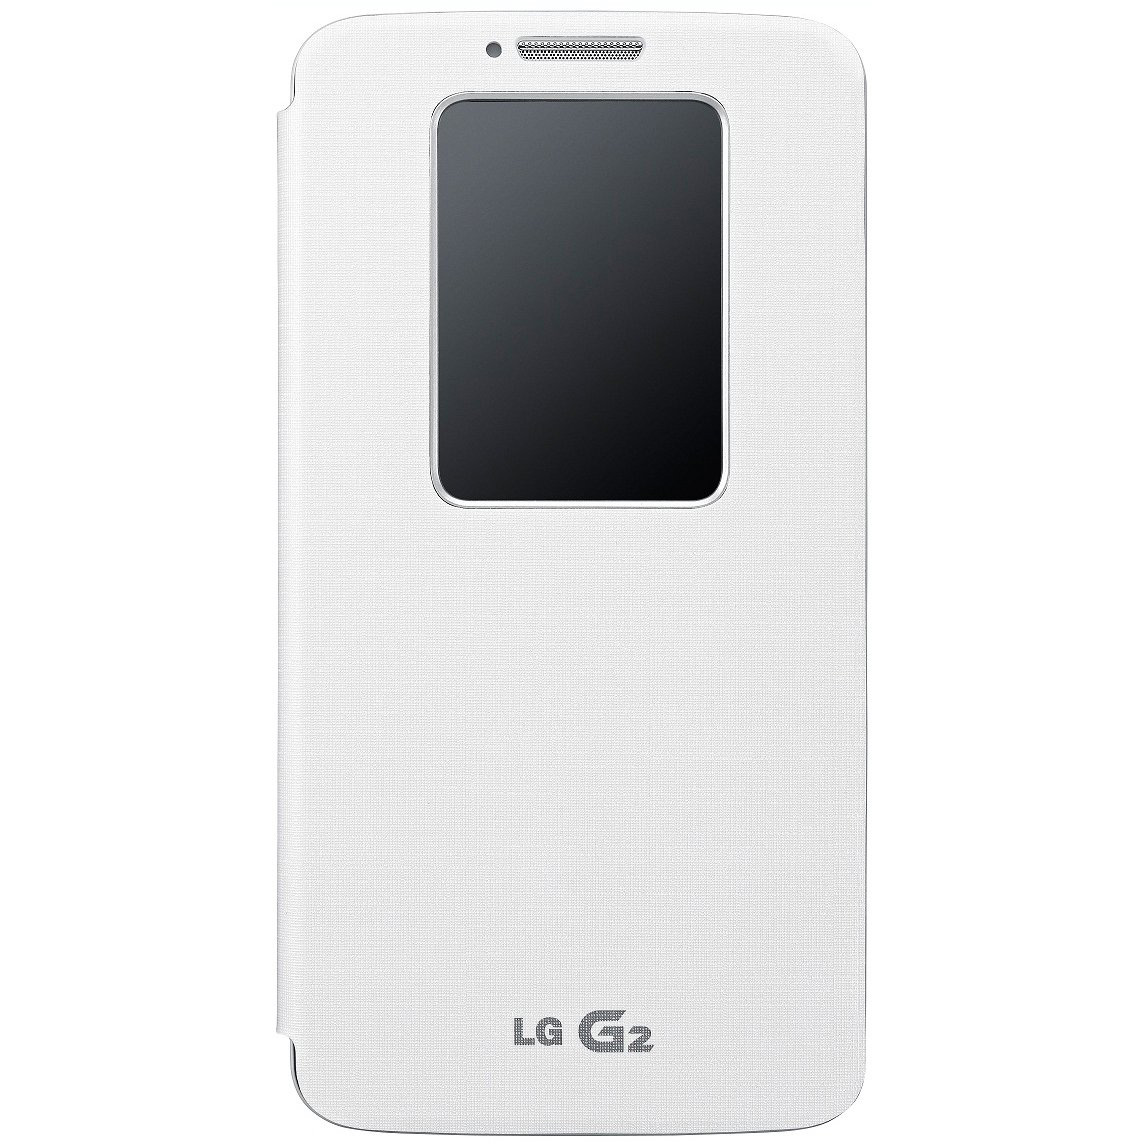 LG QuickWindow Folio Case for LG G2 Sprint/Virgin Mobile/AT&T - White - image 1 of 2